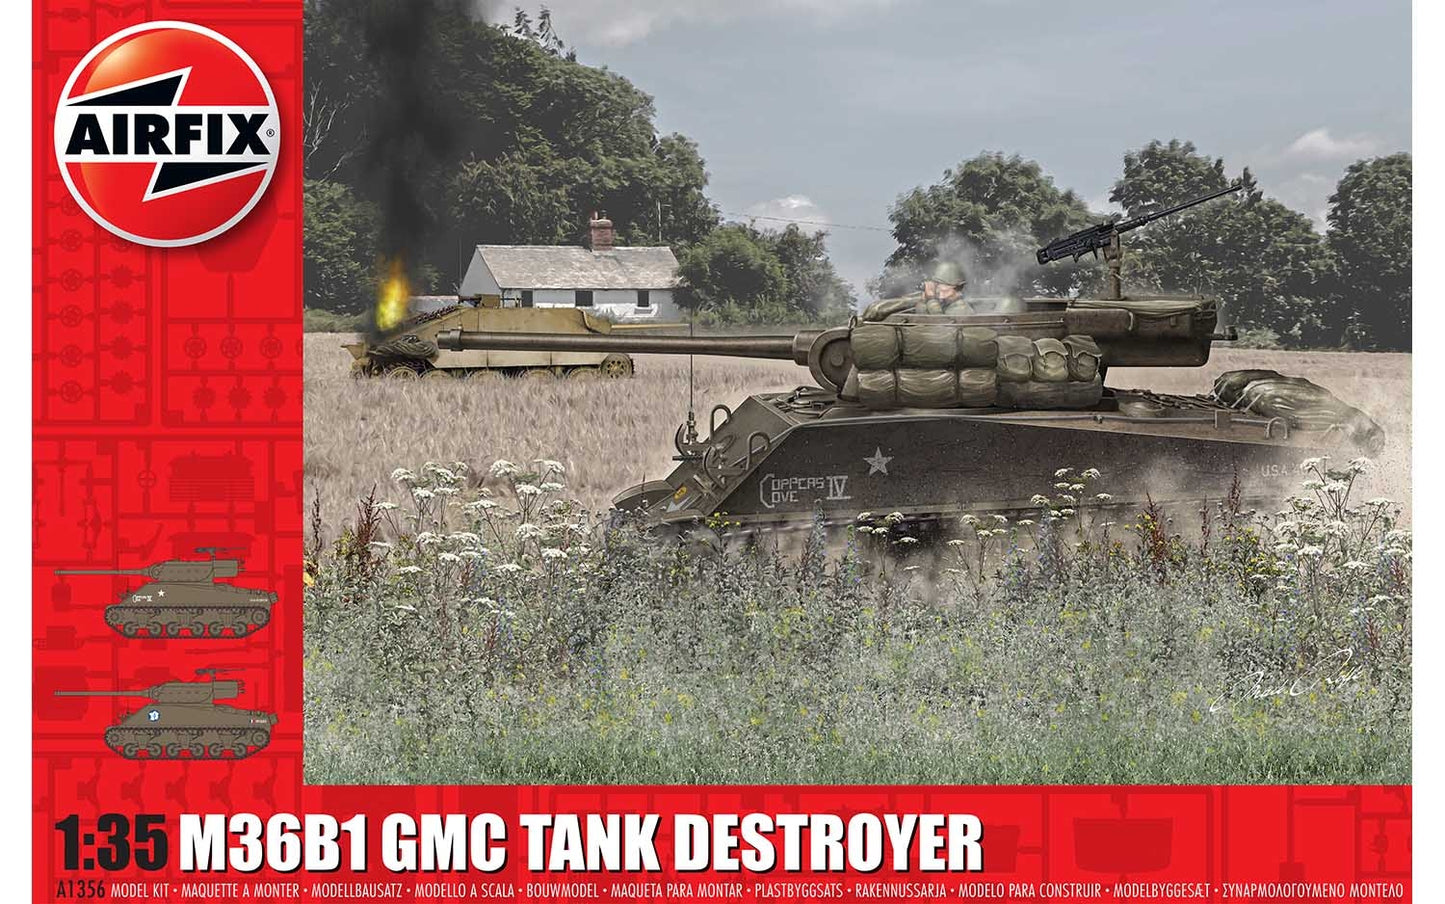 Airfix Products A1356 1:35 U.S. Army M36B1 GMC Destroyer Military Tank Model Kit